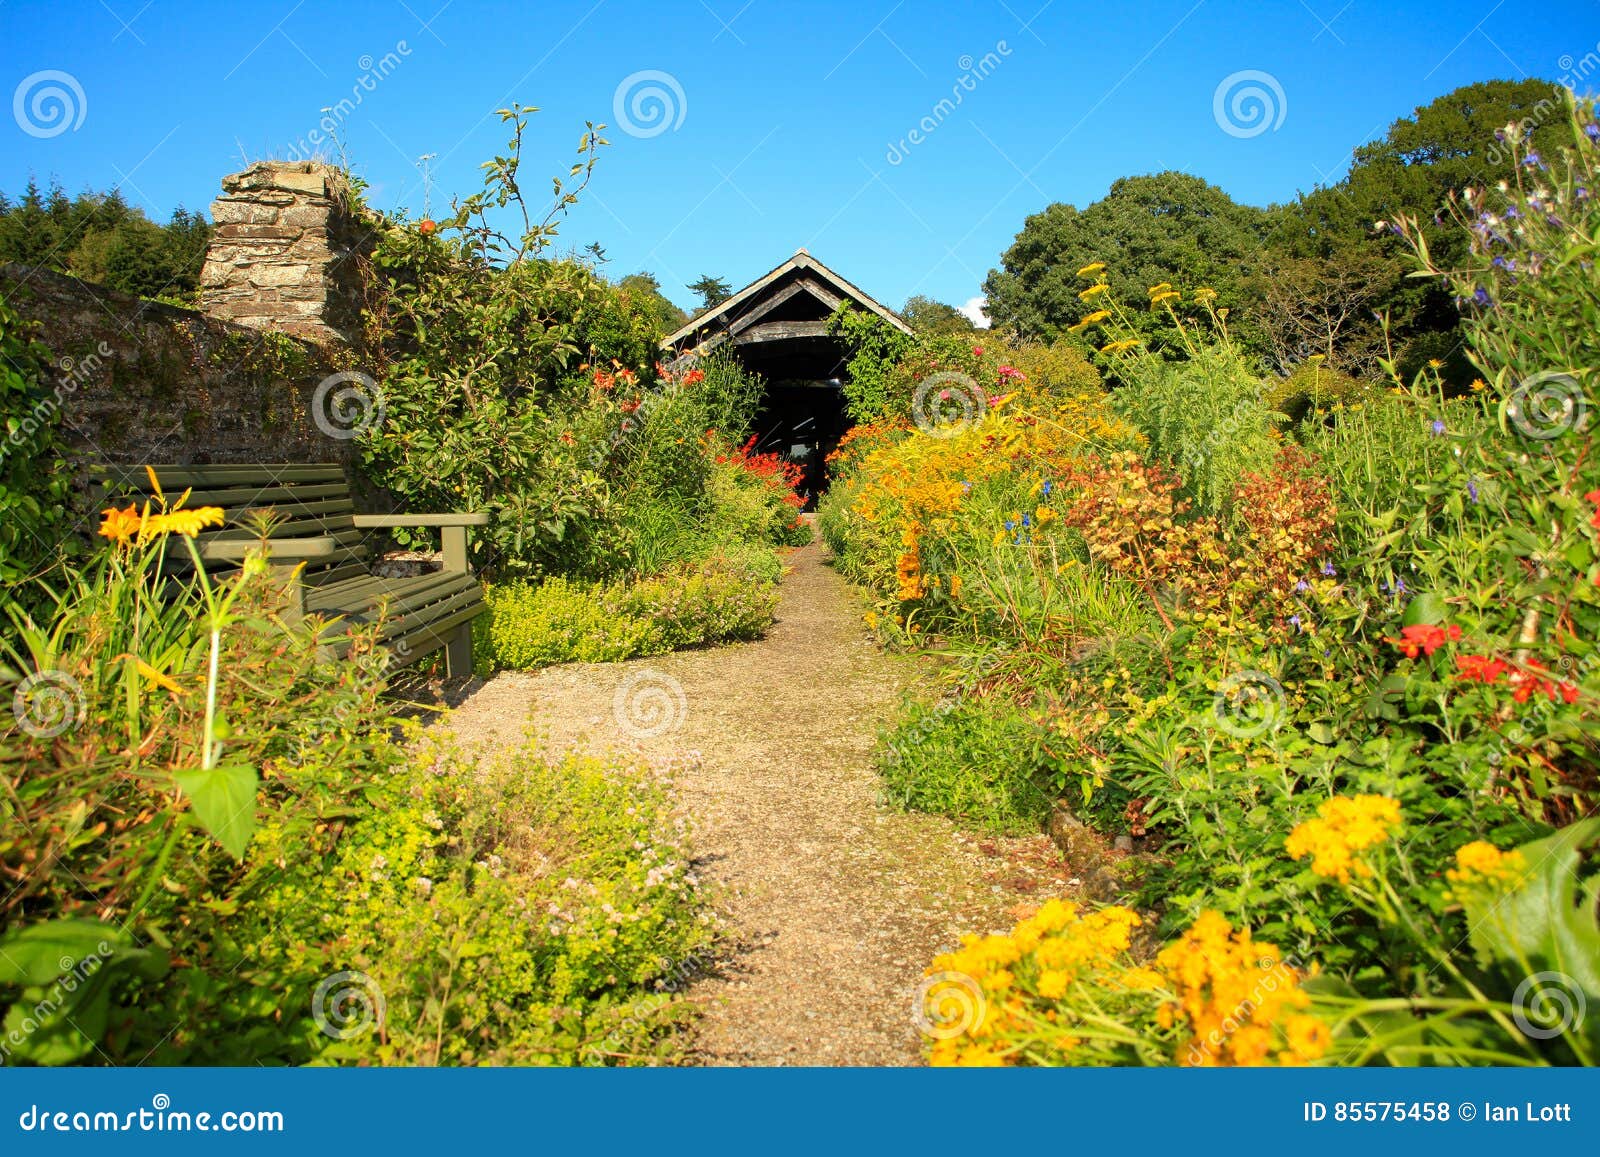 Old English Country Garden Editorial Stock Photo Image Of House